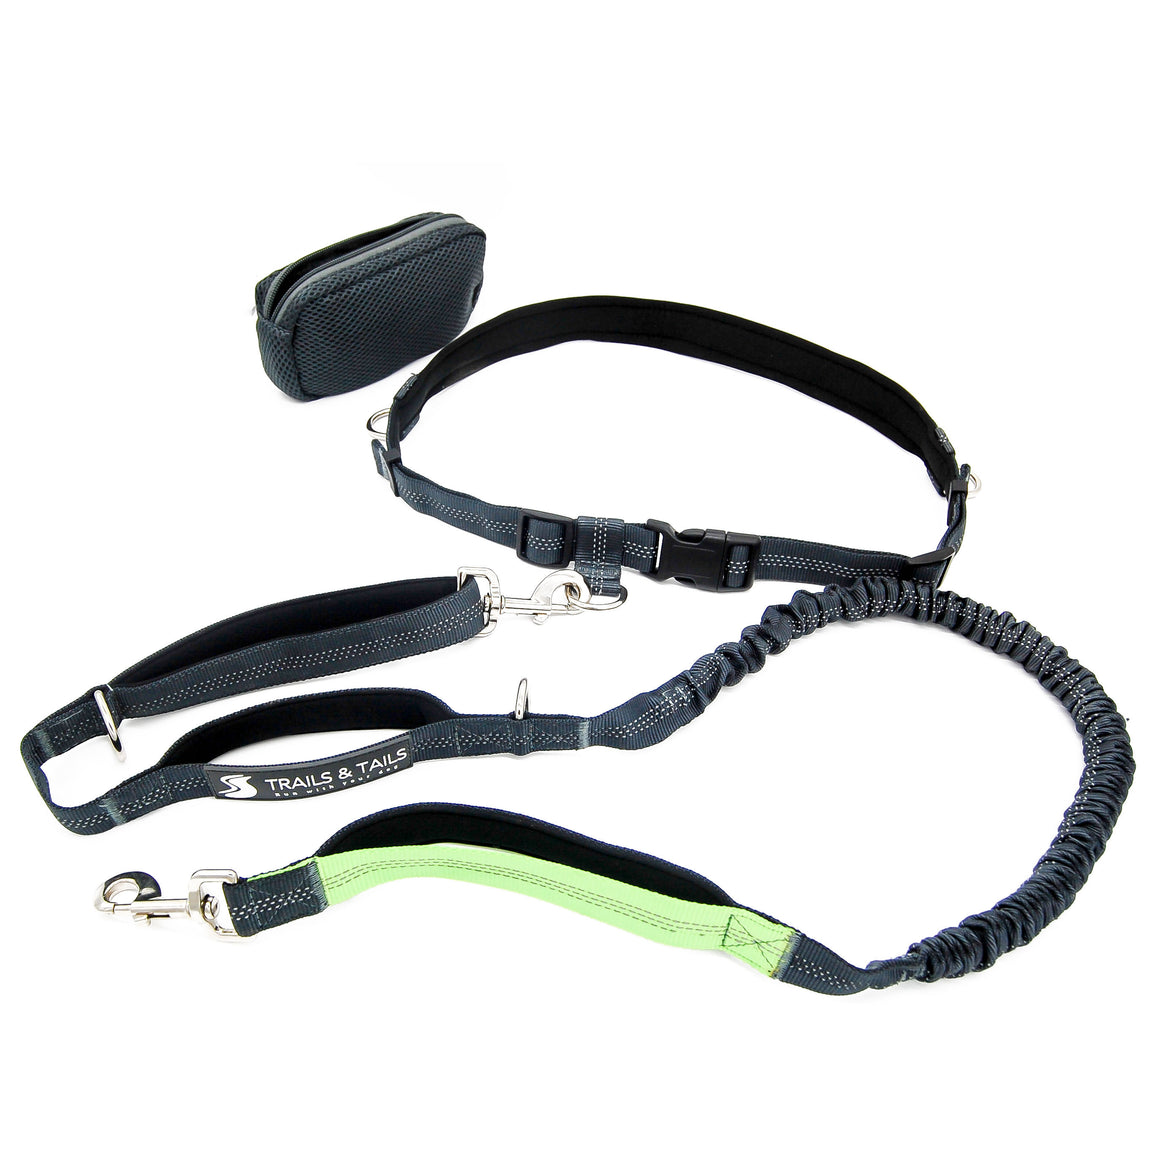 Trails & Tails Ultimate Hands-Free Dog Leash